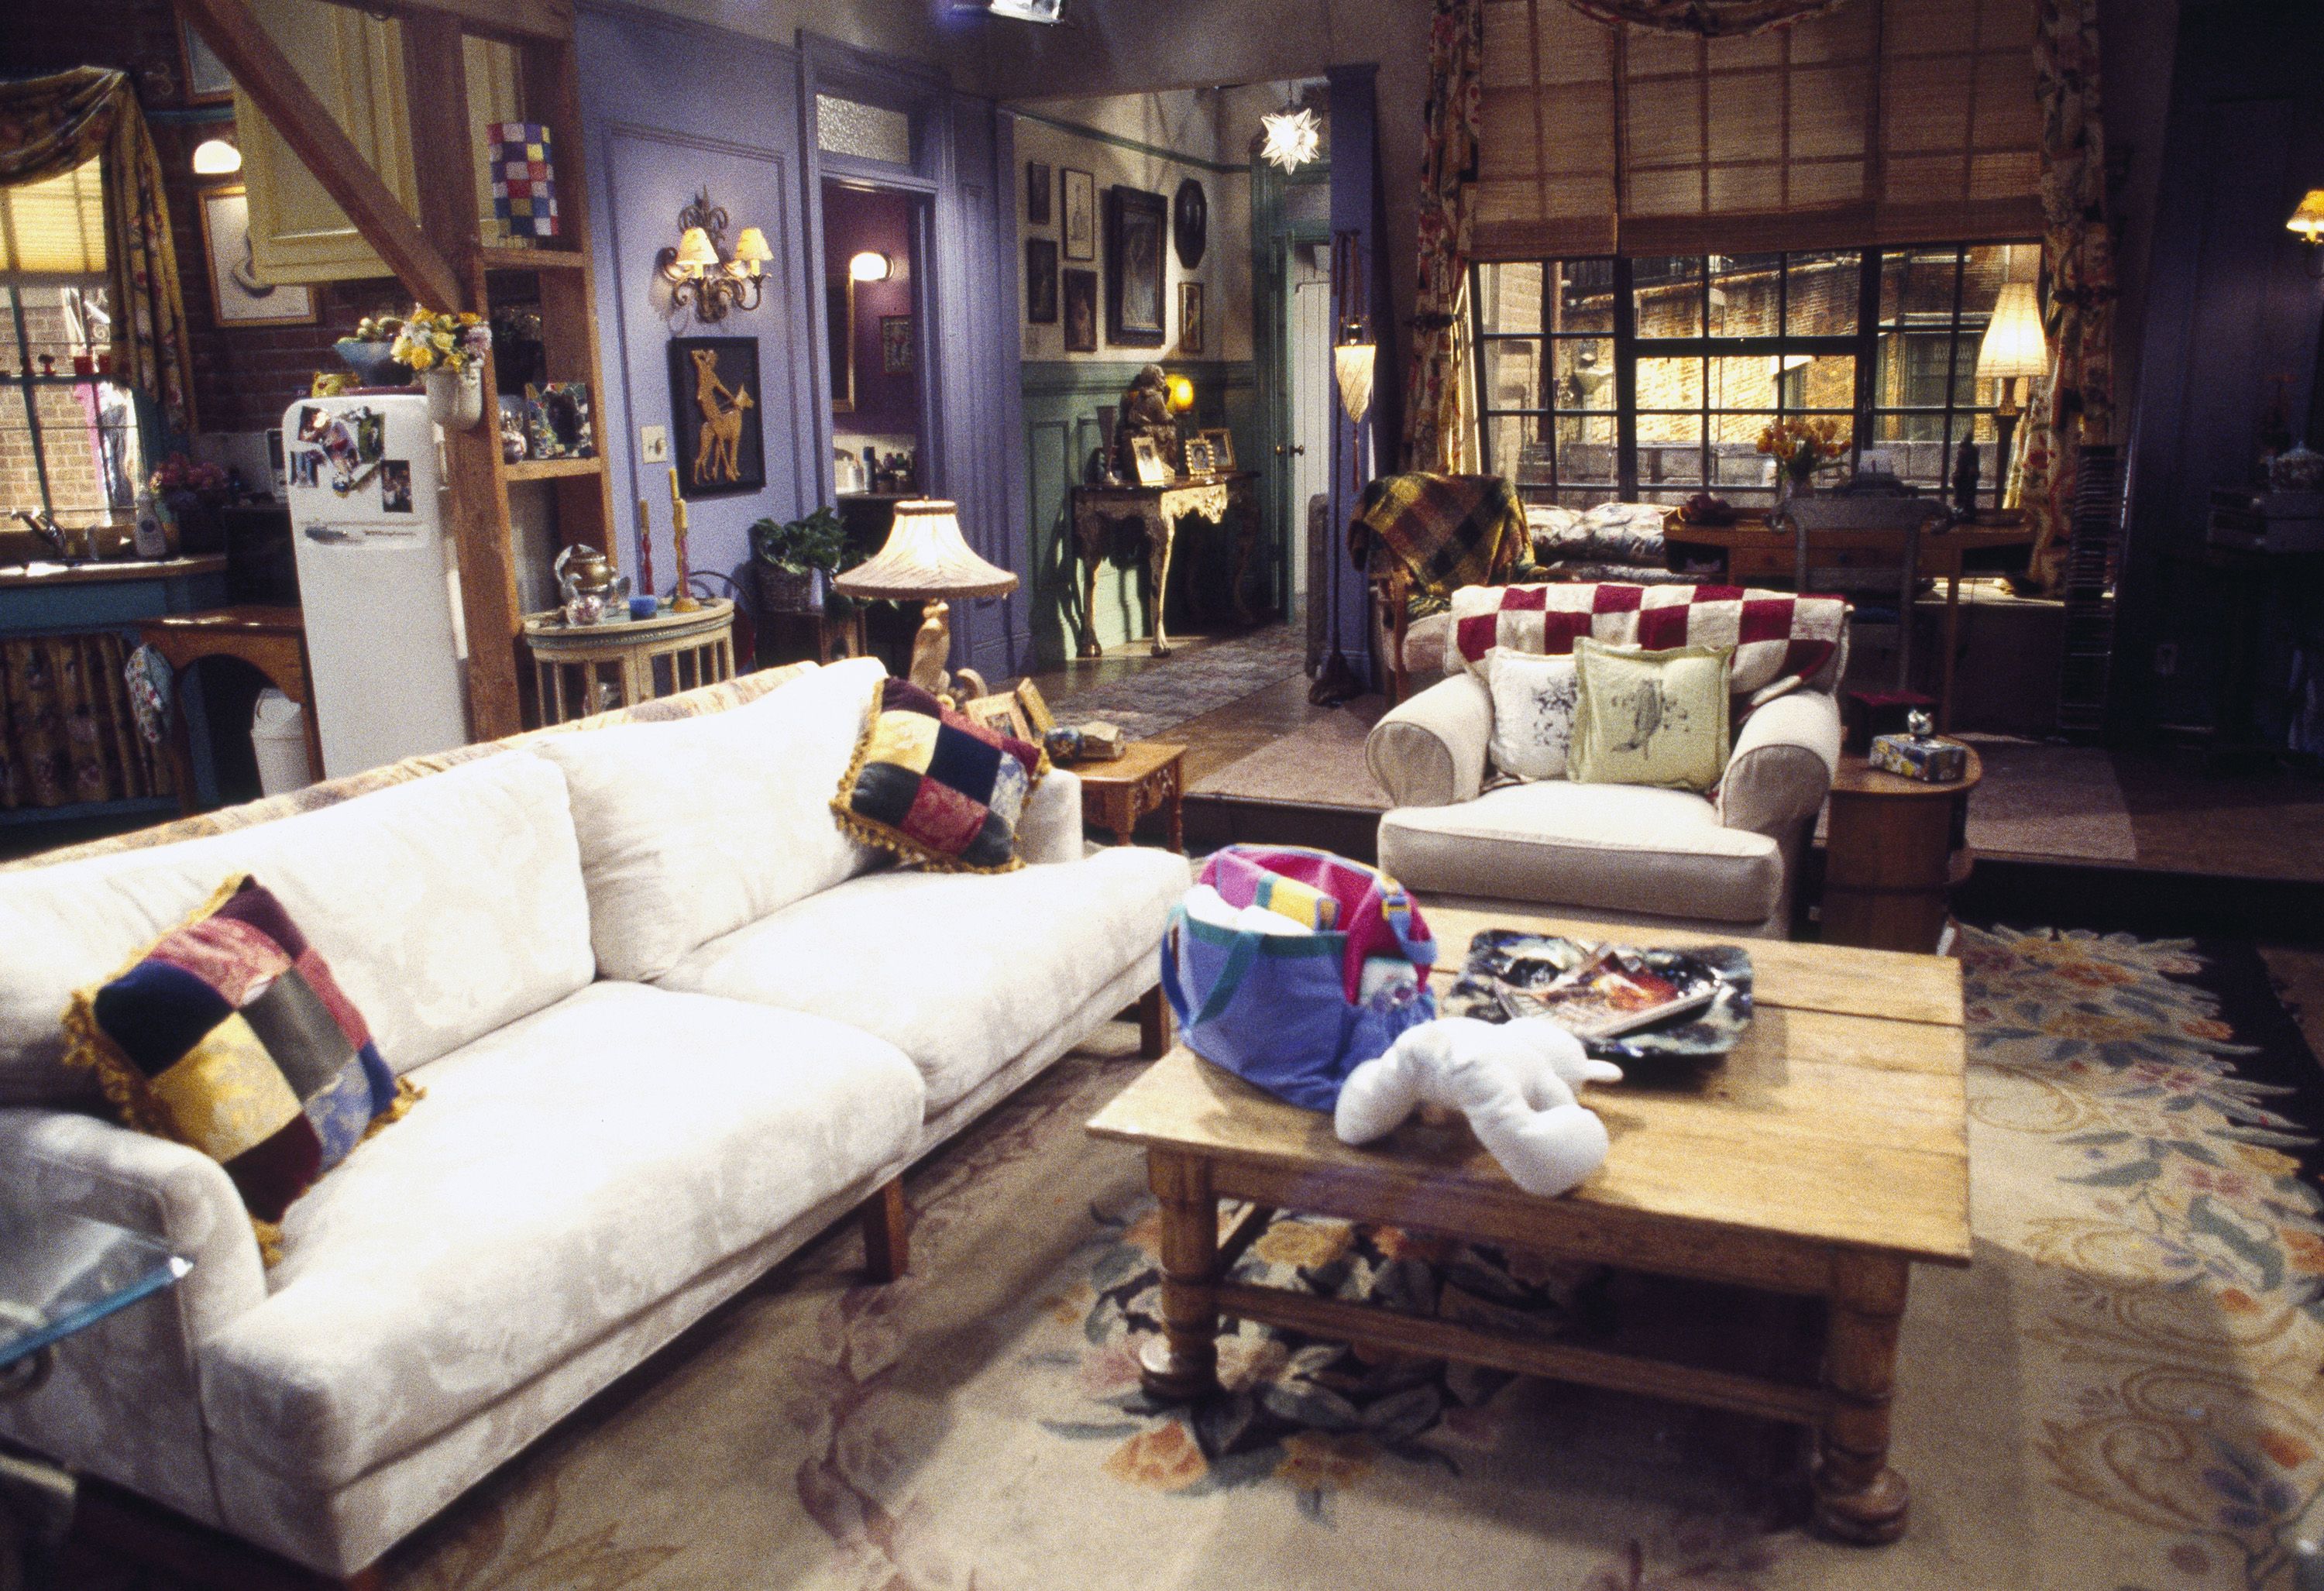 Spend a Night at the FRIENDS Apartment for Just $20 - Nerdist